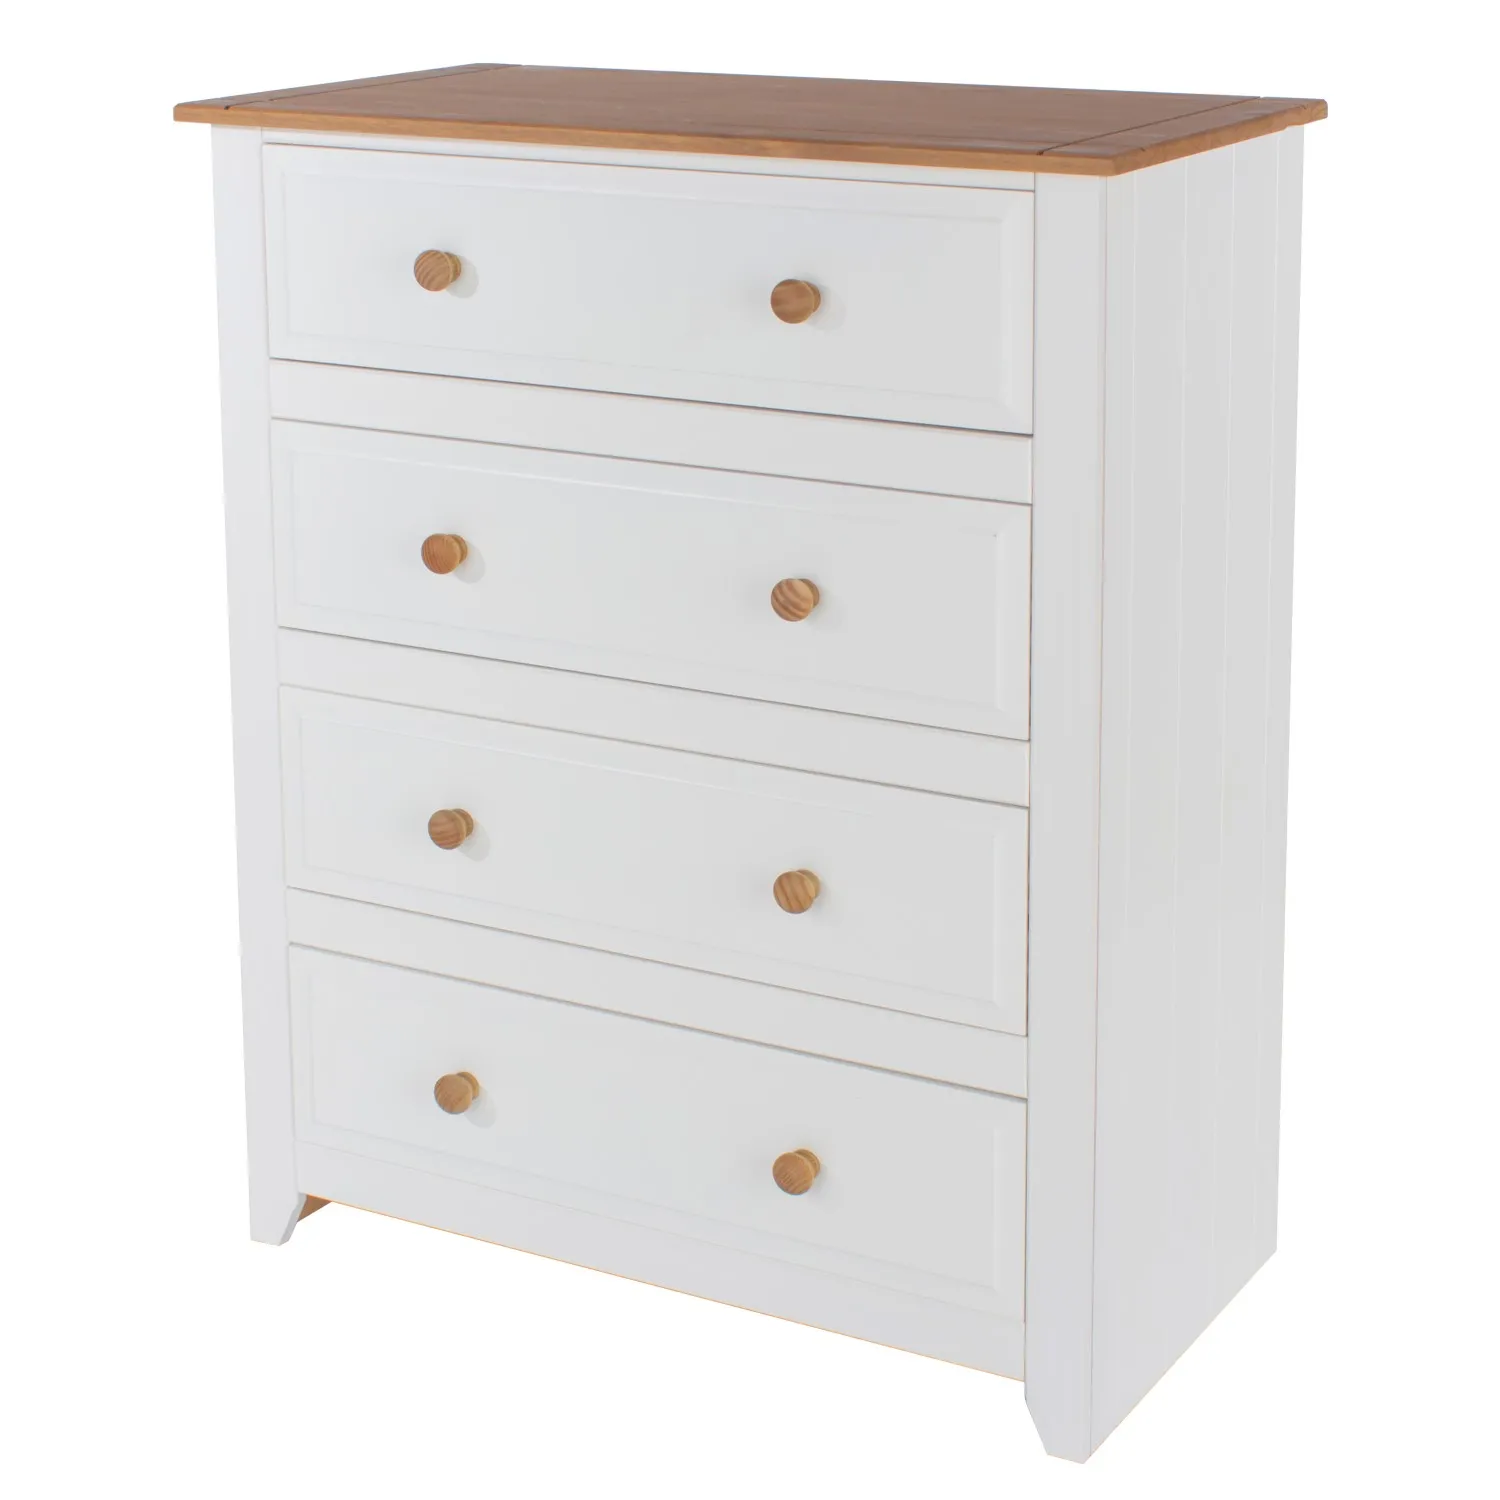 Capri Modern Arctic White Painted Solid Pine Chest of 4 Dovetail Drawers 104.3x 83.5cm